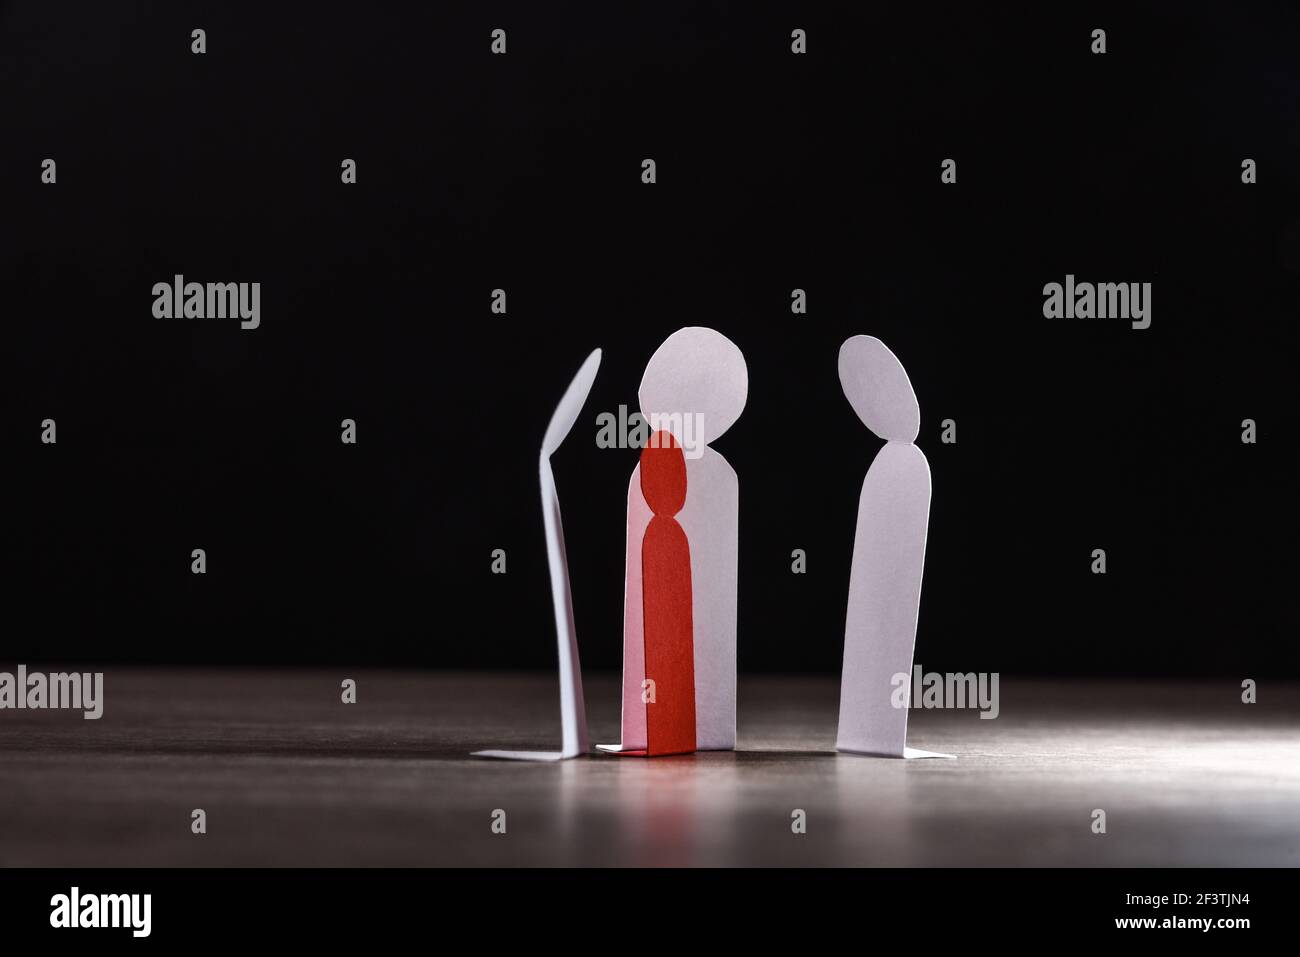 Child bullying concept with cutouts of little paper men on wooden table and dark background Stock Photo